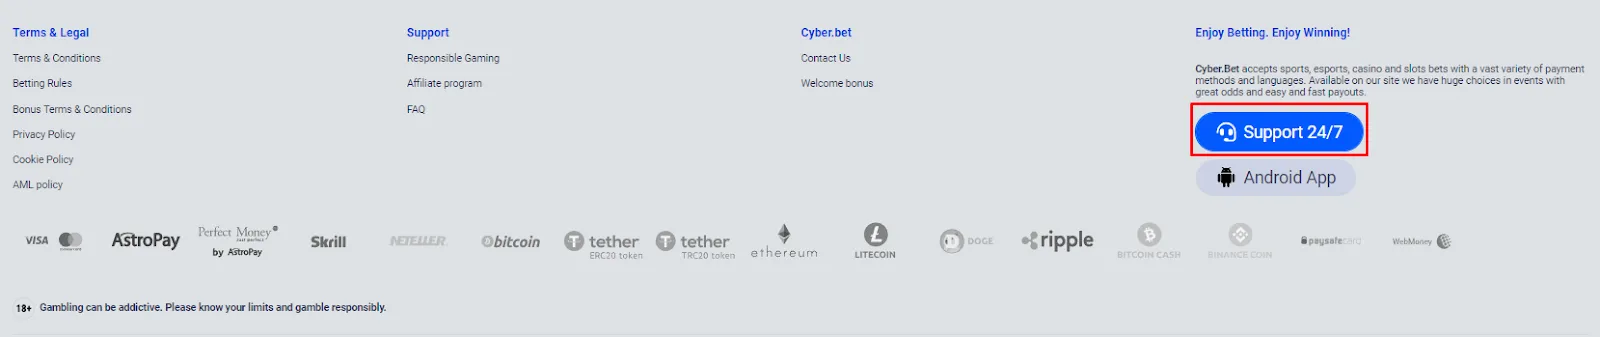 Cyber.Bet live chat.